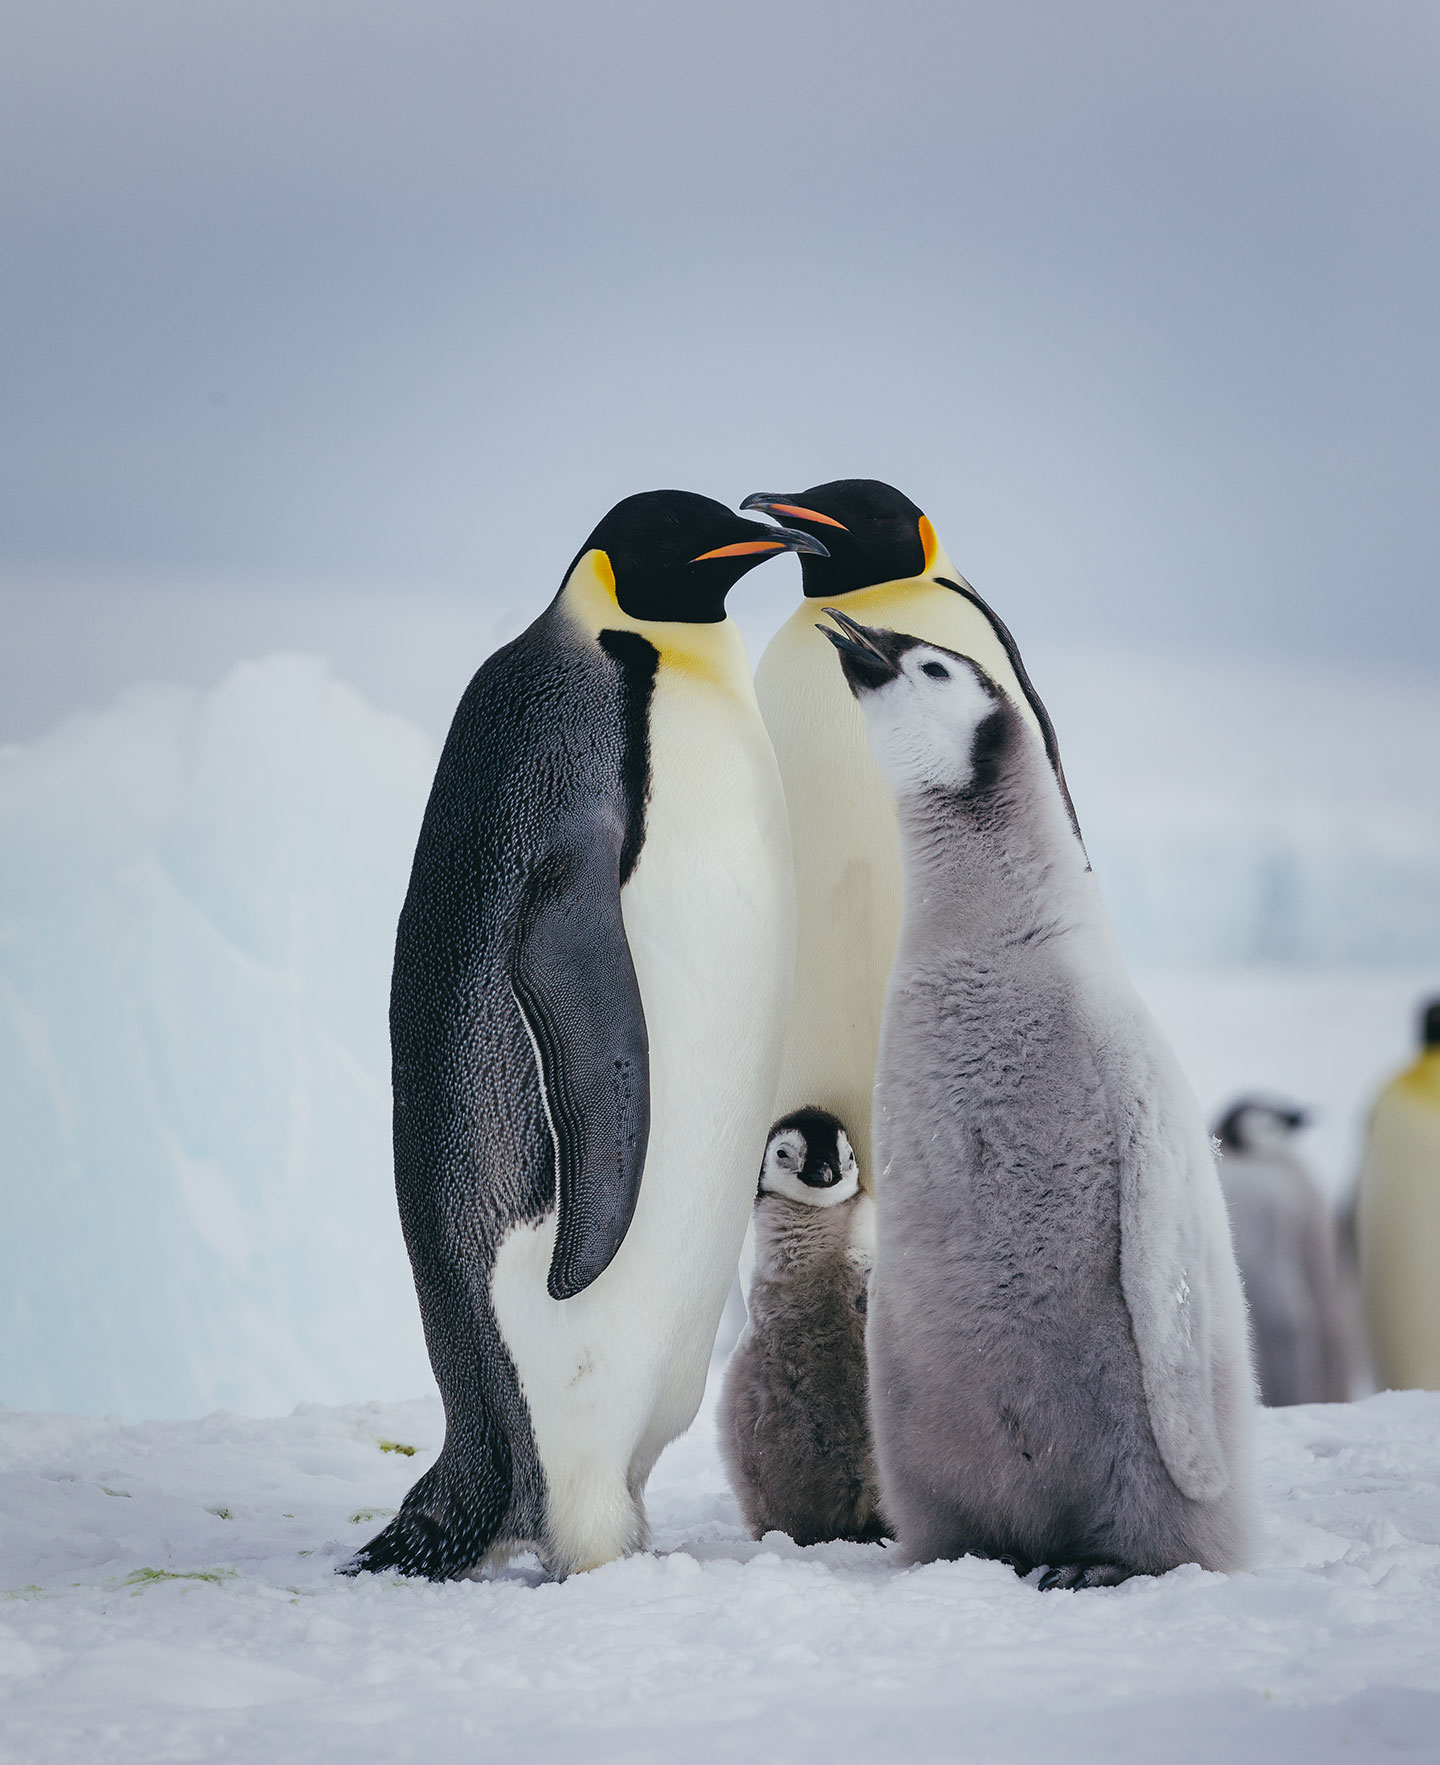 Emperor penguins raise chicks on the ice